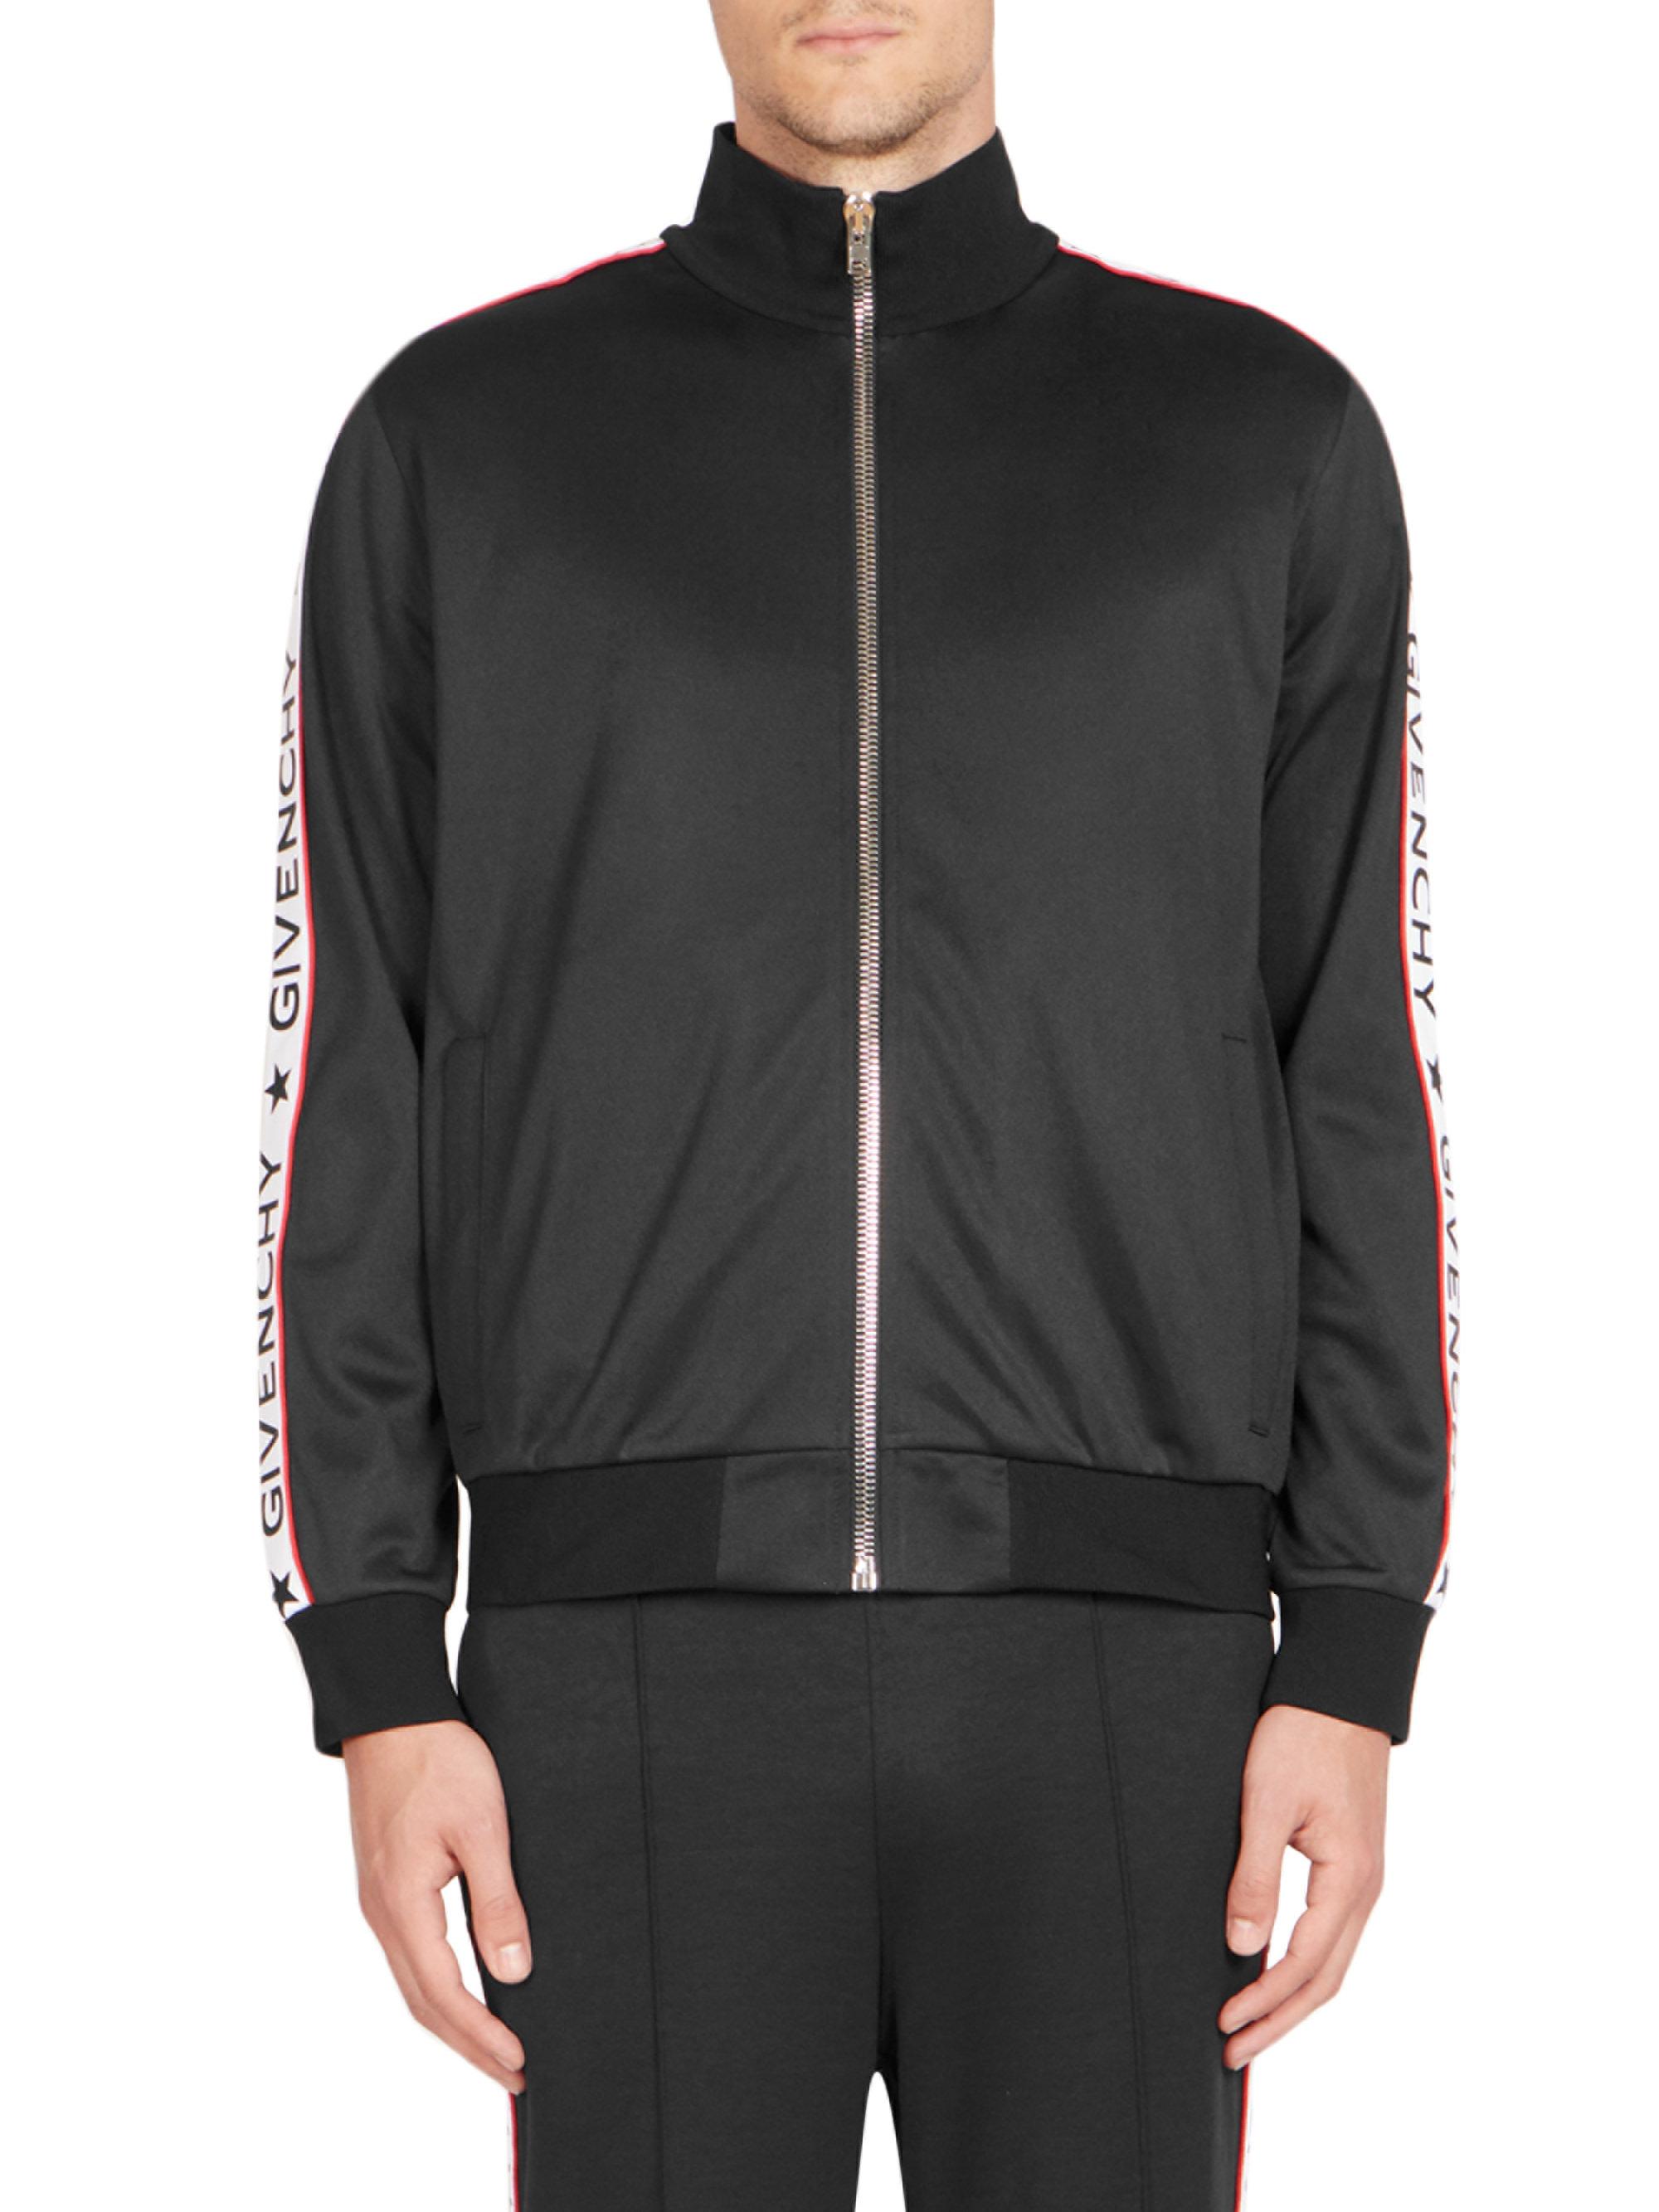 Givenchy Synthetic Logo Track Jacket in Black for Men - Lyst